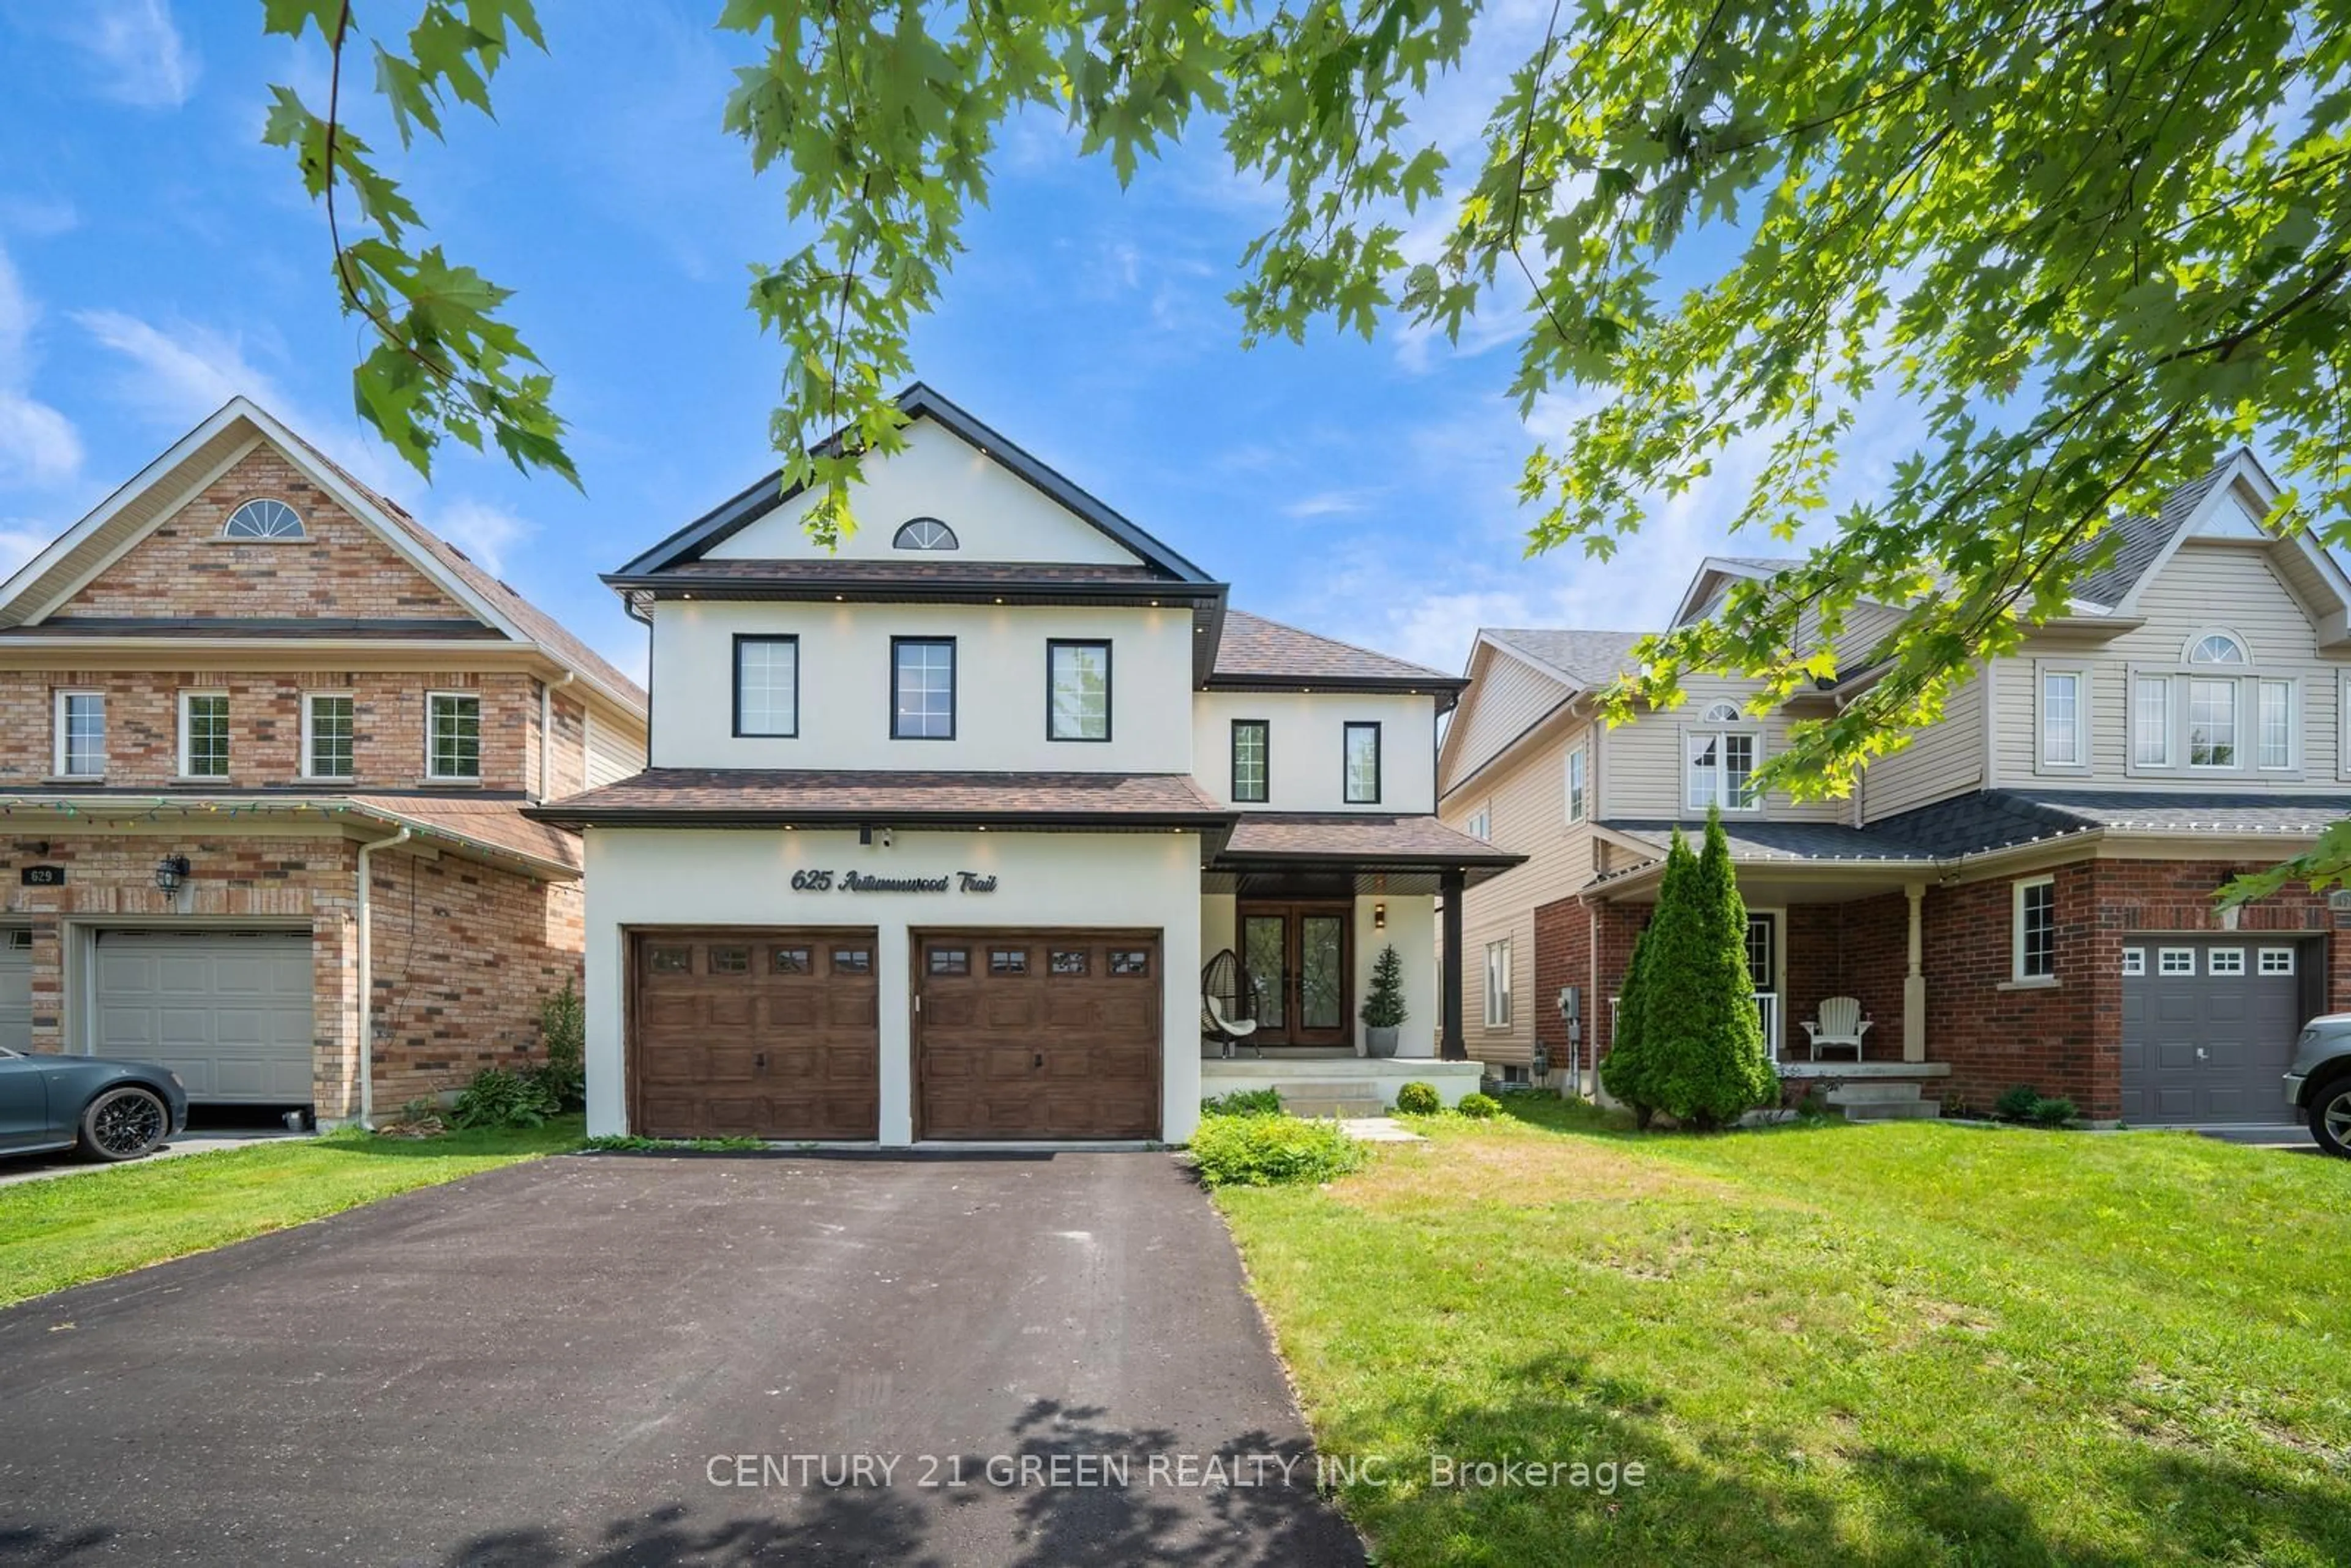 Home with brick exterior material for 625 Autumnwood Tr, Oshawa Ontario L1K 3A9